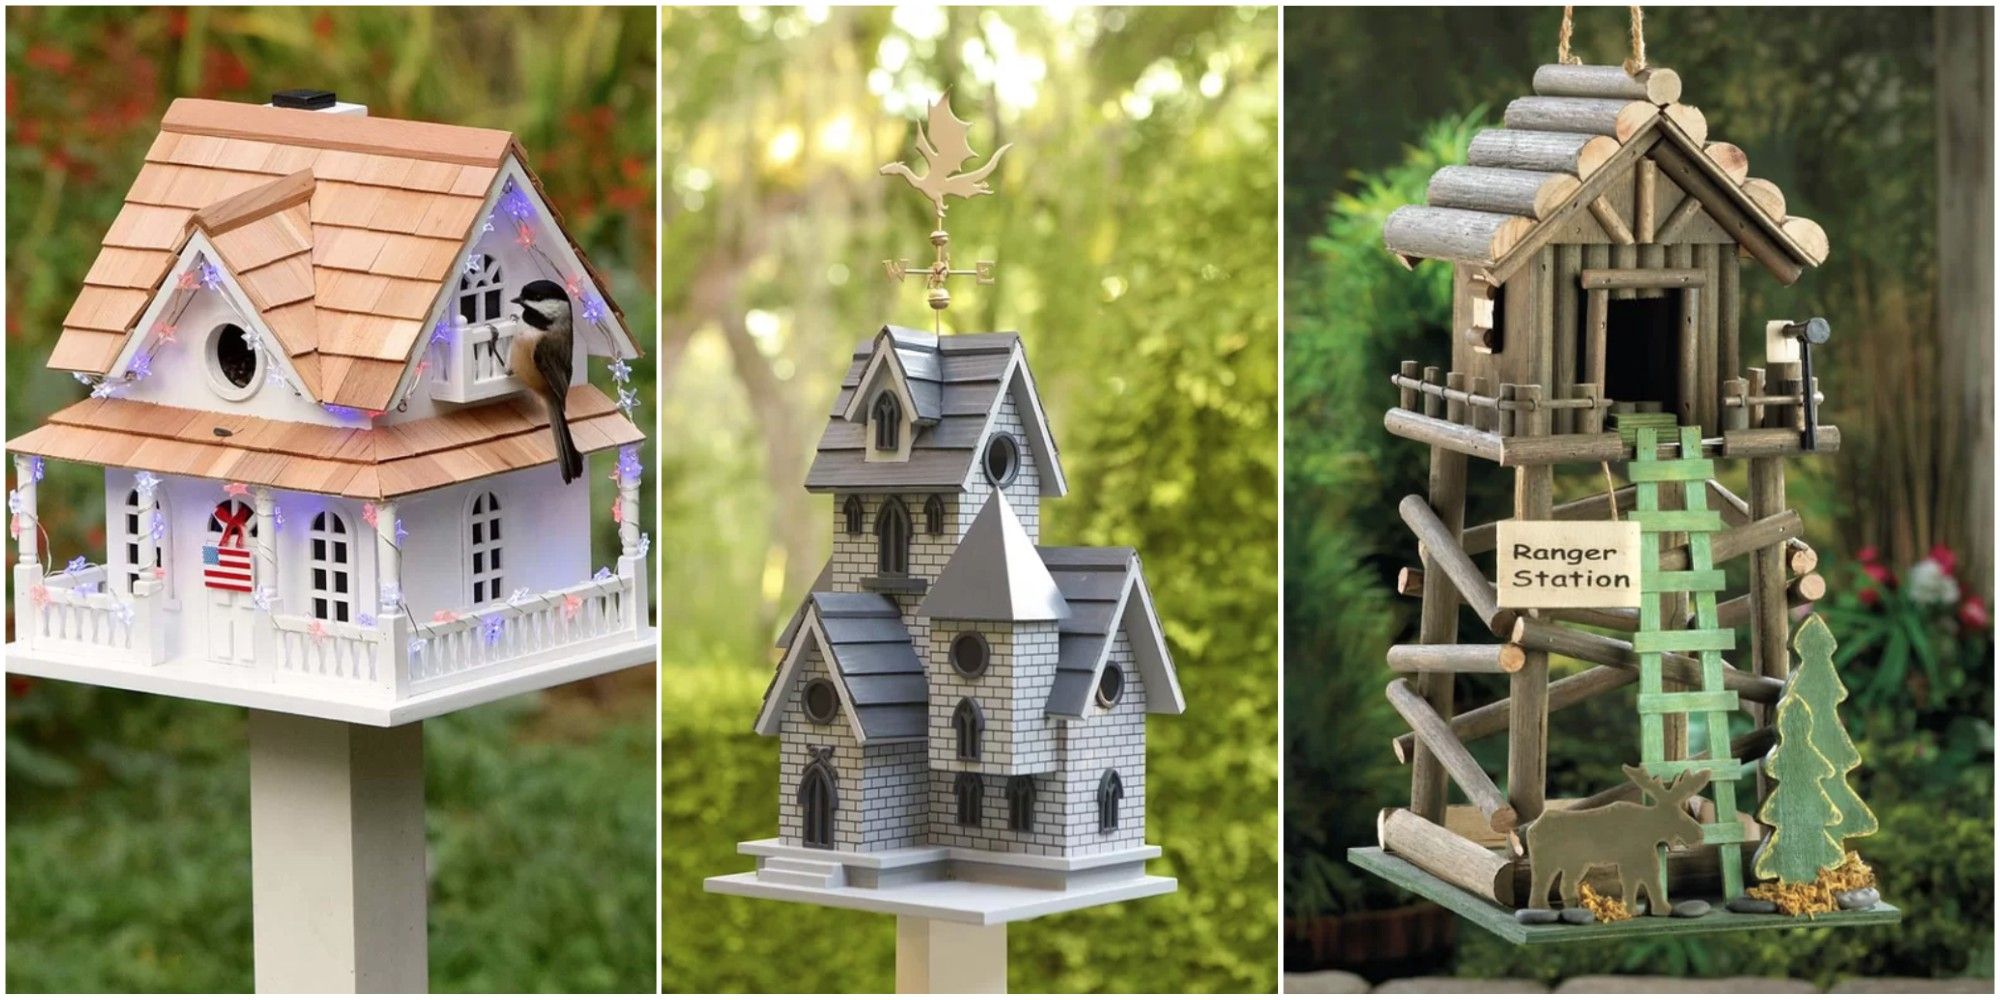 How to build a small bird house